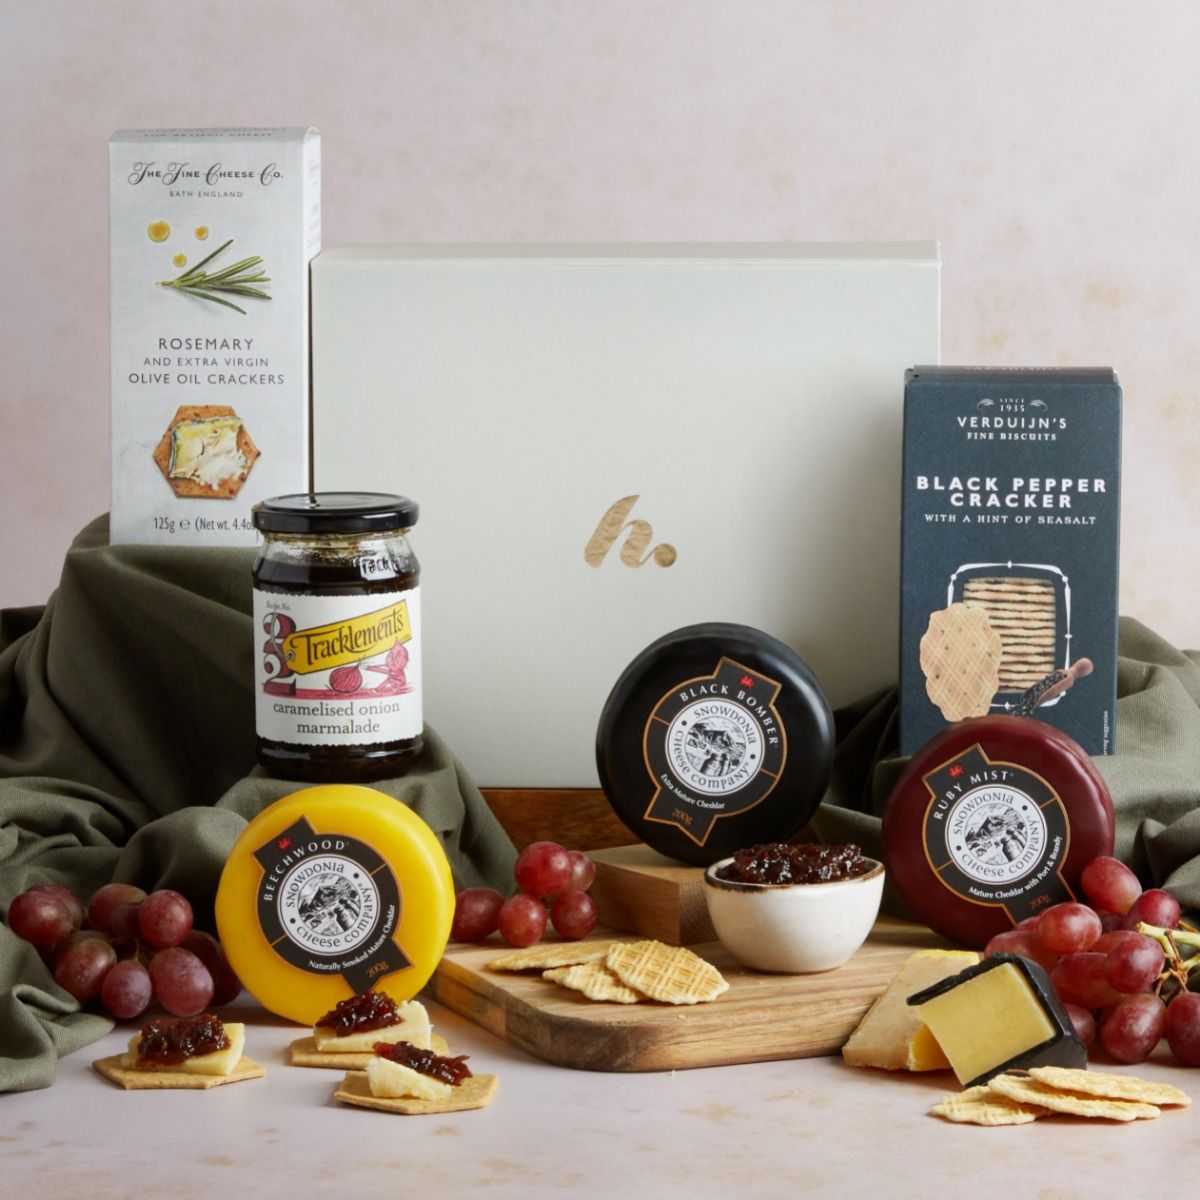 A trio of cheese truckles in a hamper